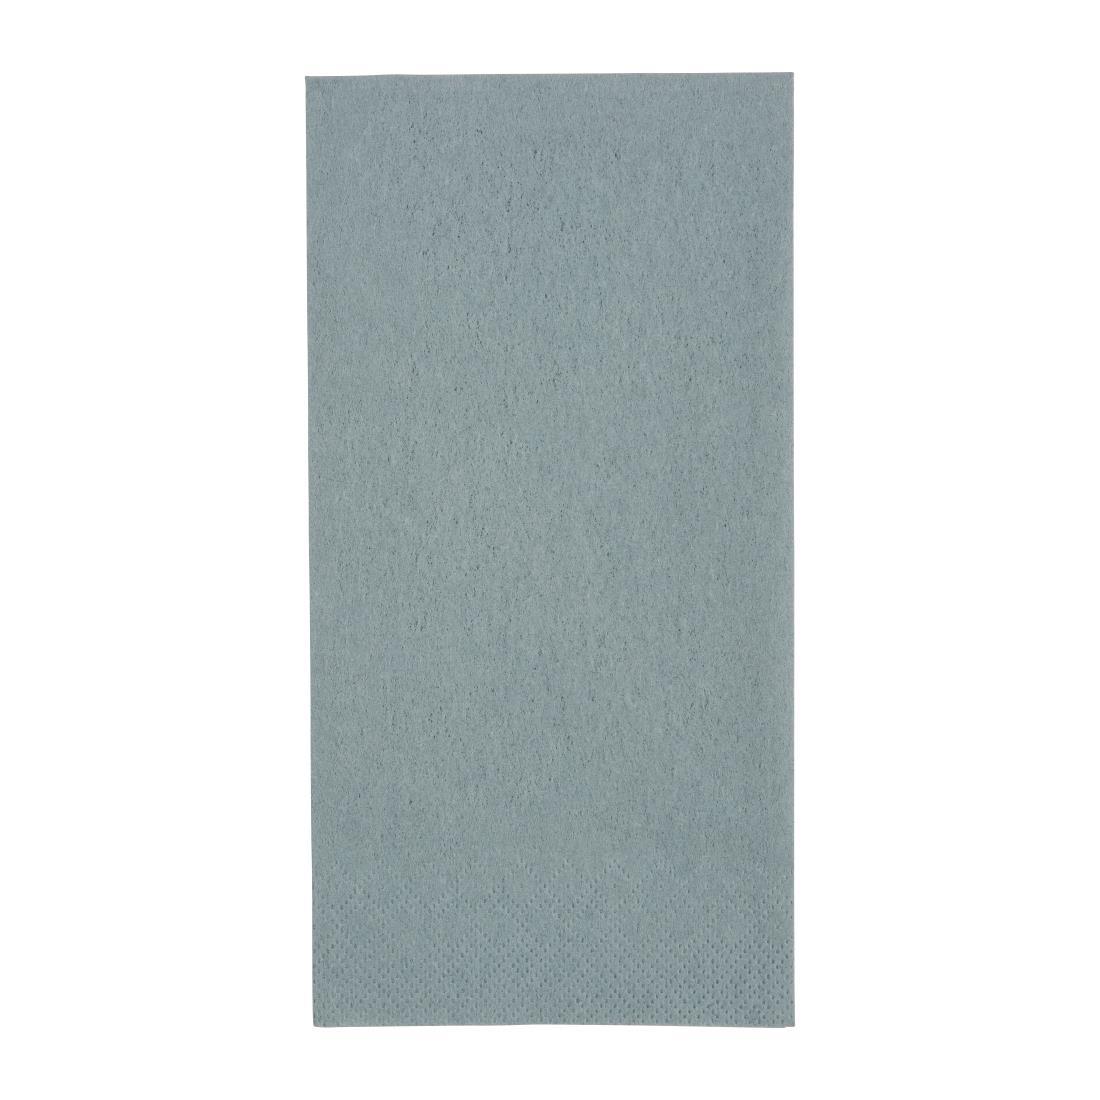 Fiesta Recyclable Dinner Napkin Grey 40x40cm 3ply 1/8 Fold (Pack of 1000) - FE260  - 1